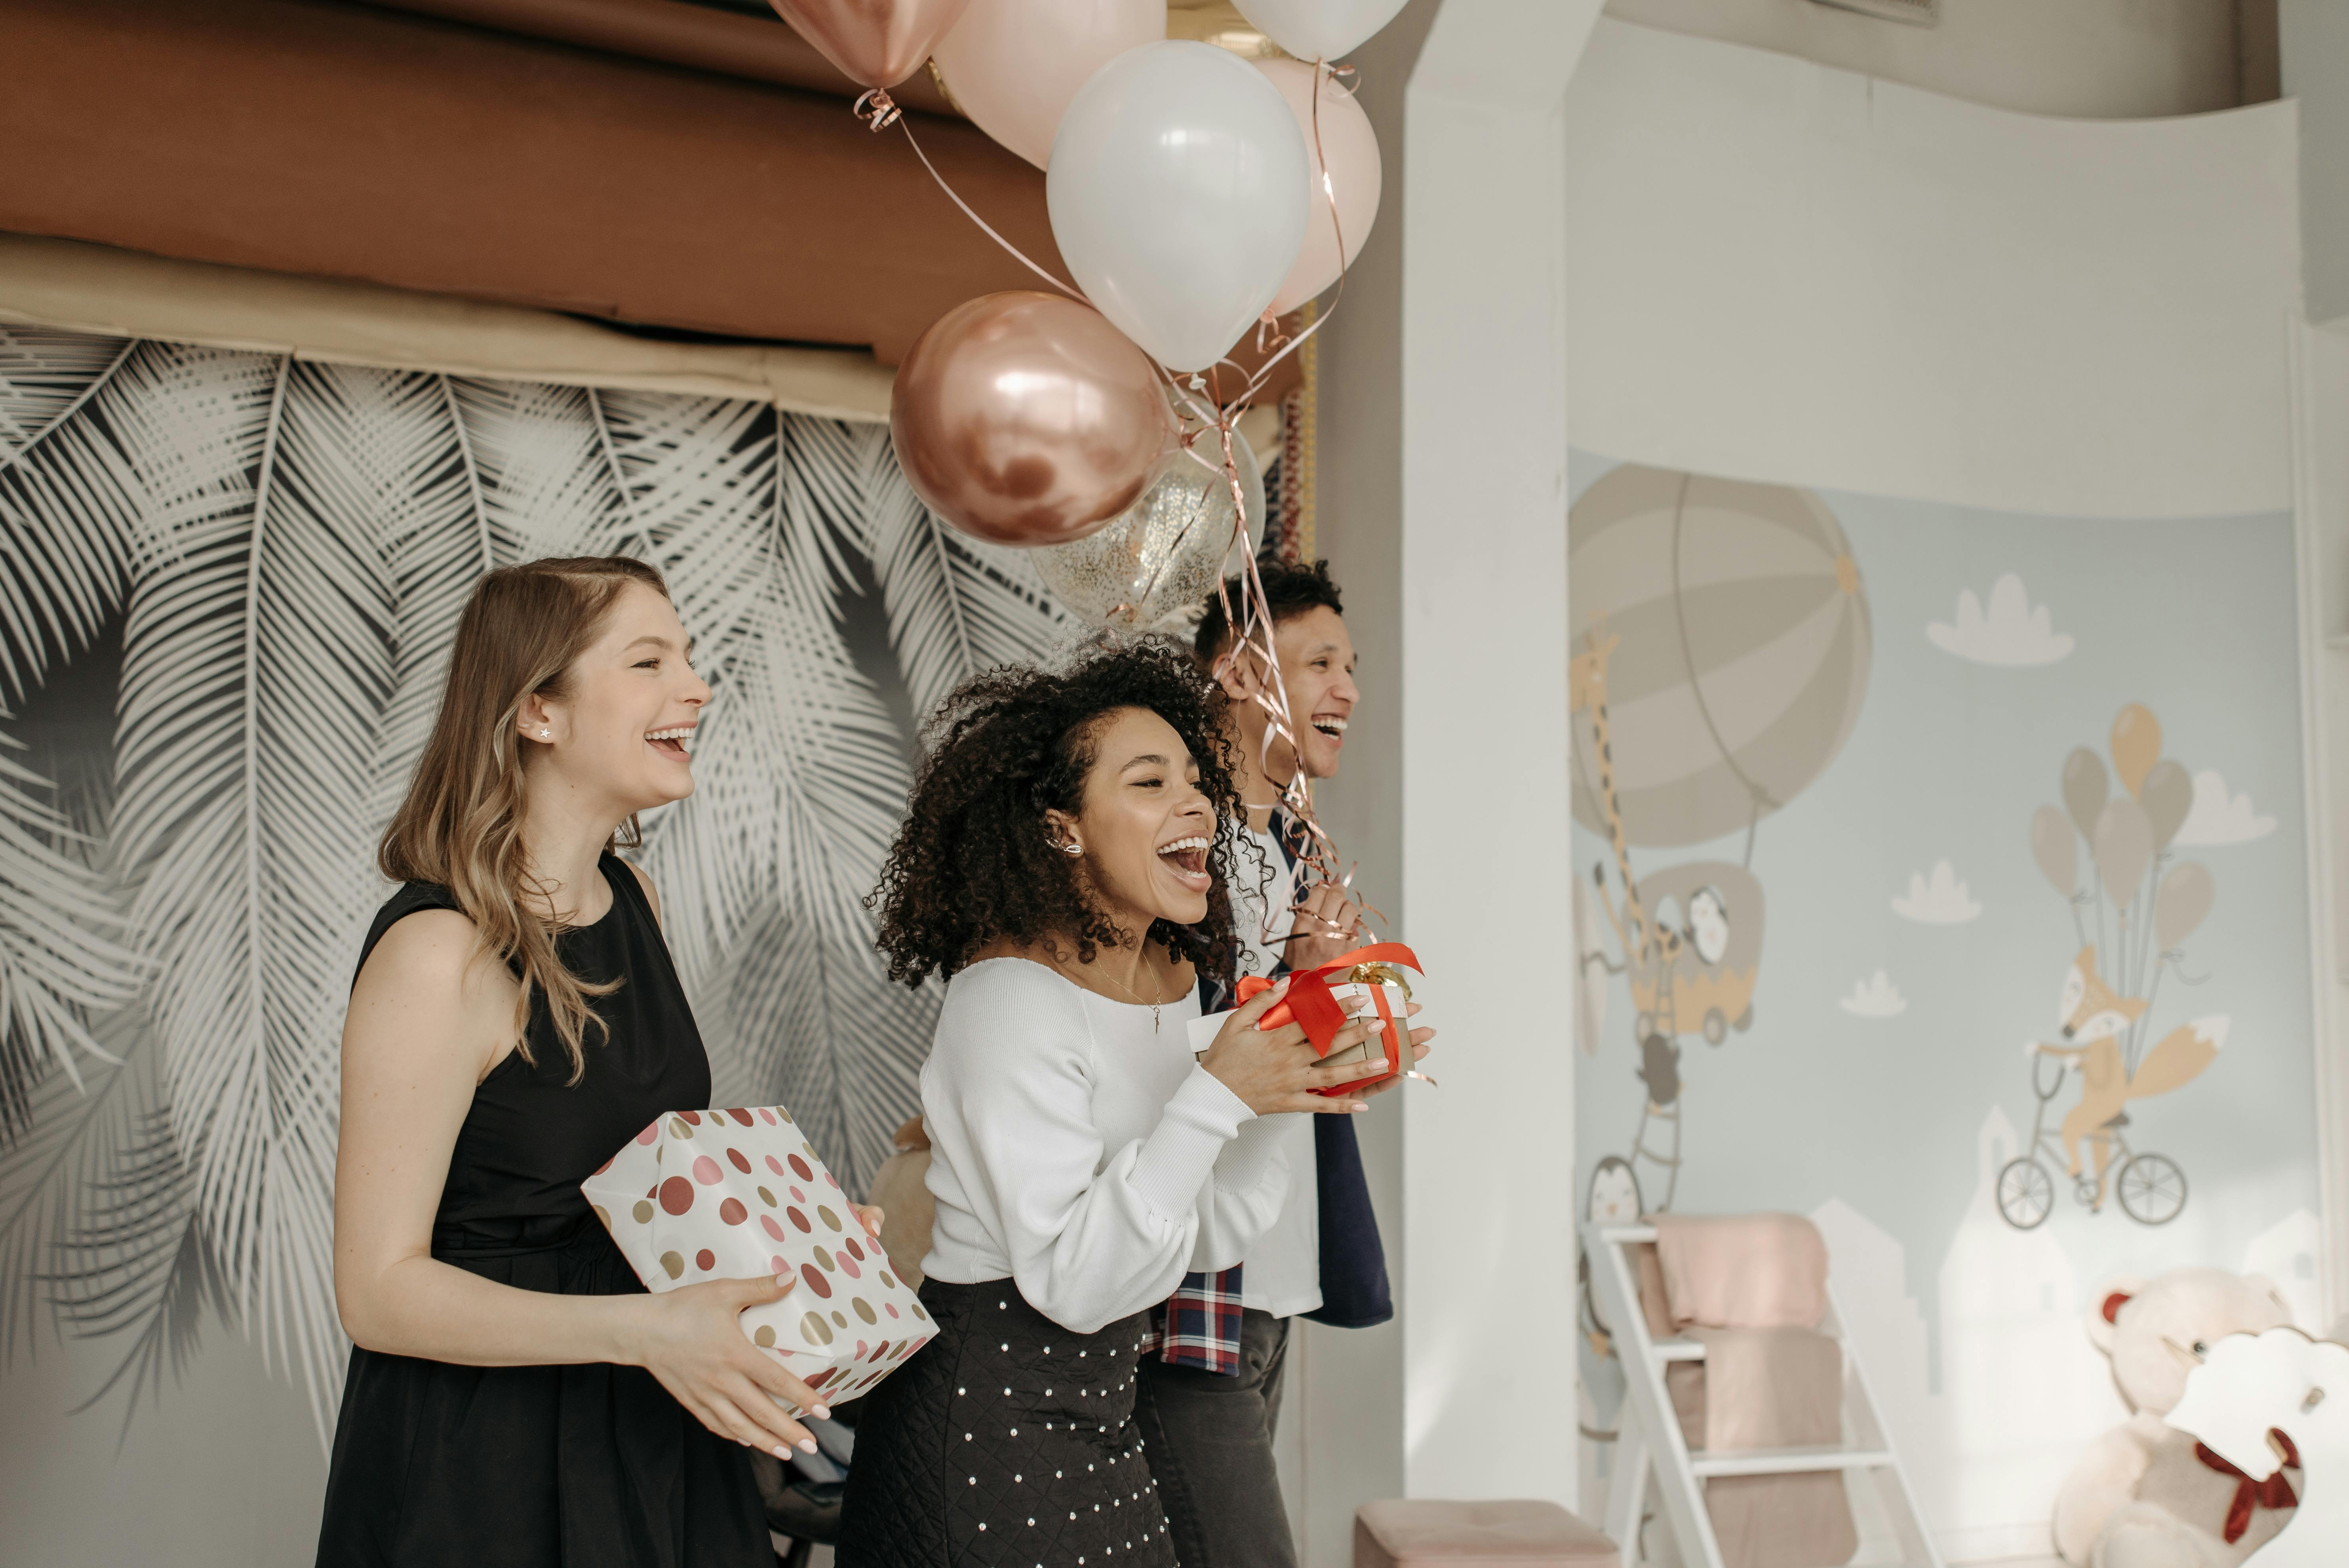 A group of people at a party with balloons | Source: Pexels